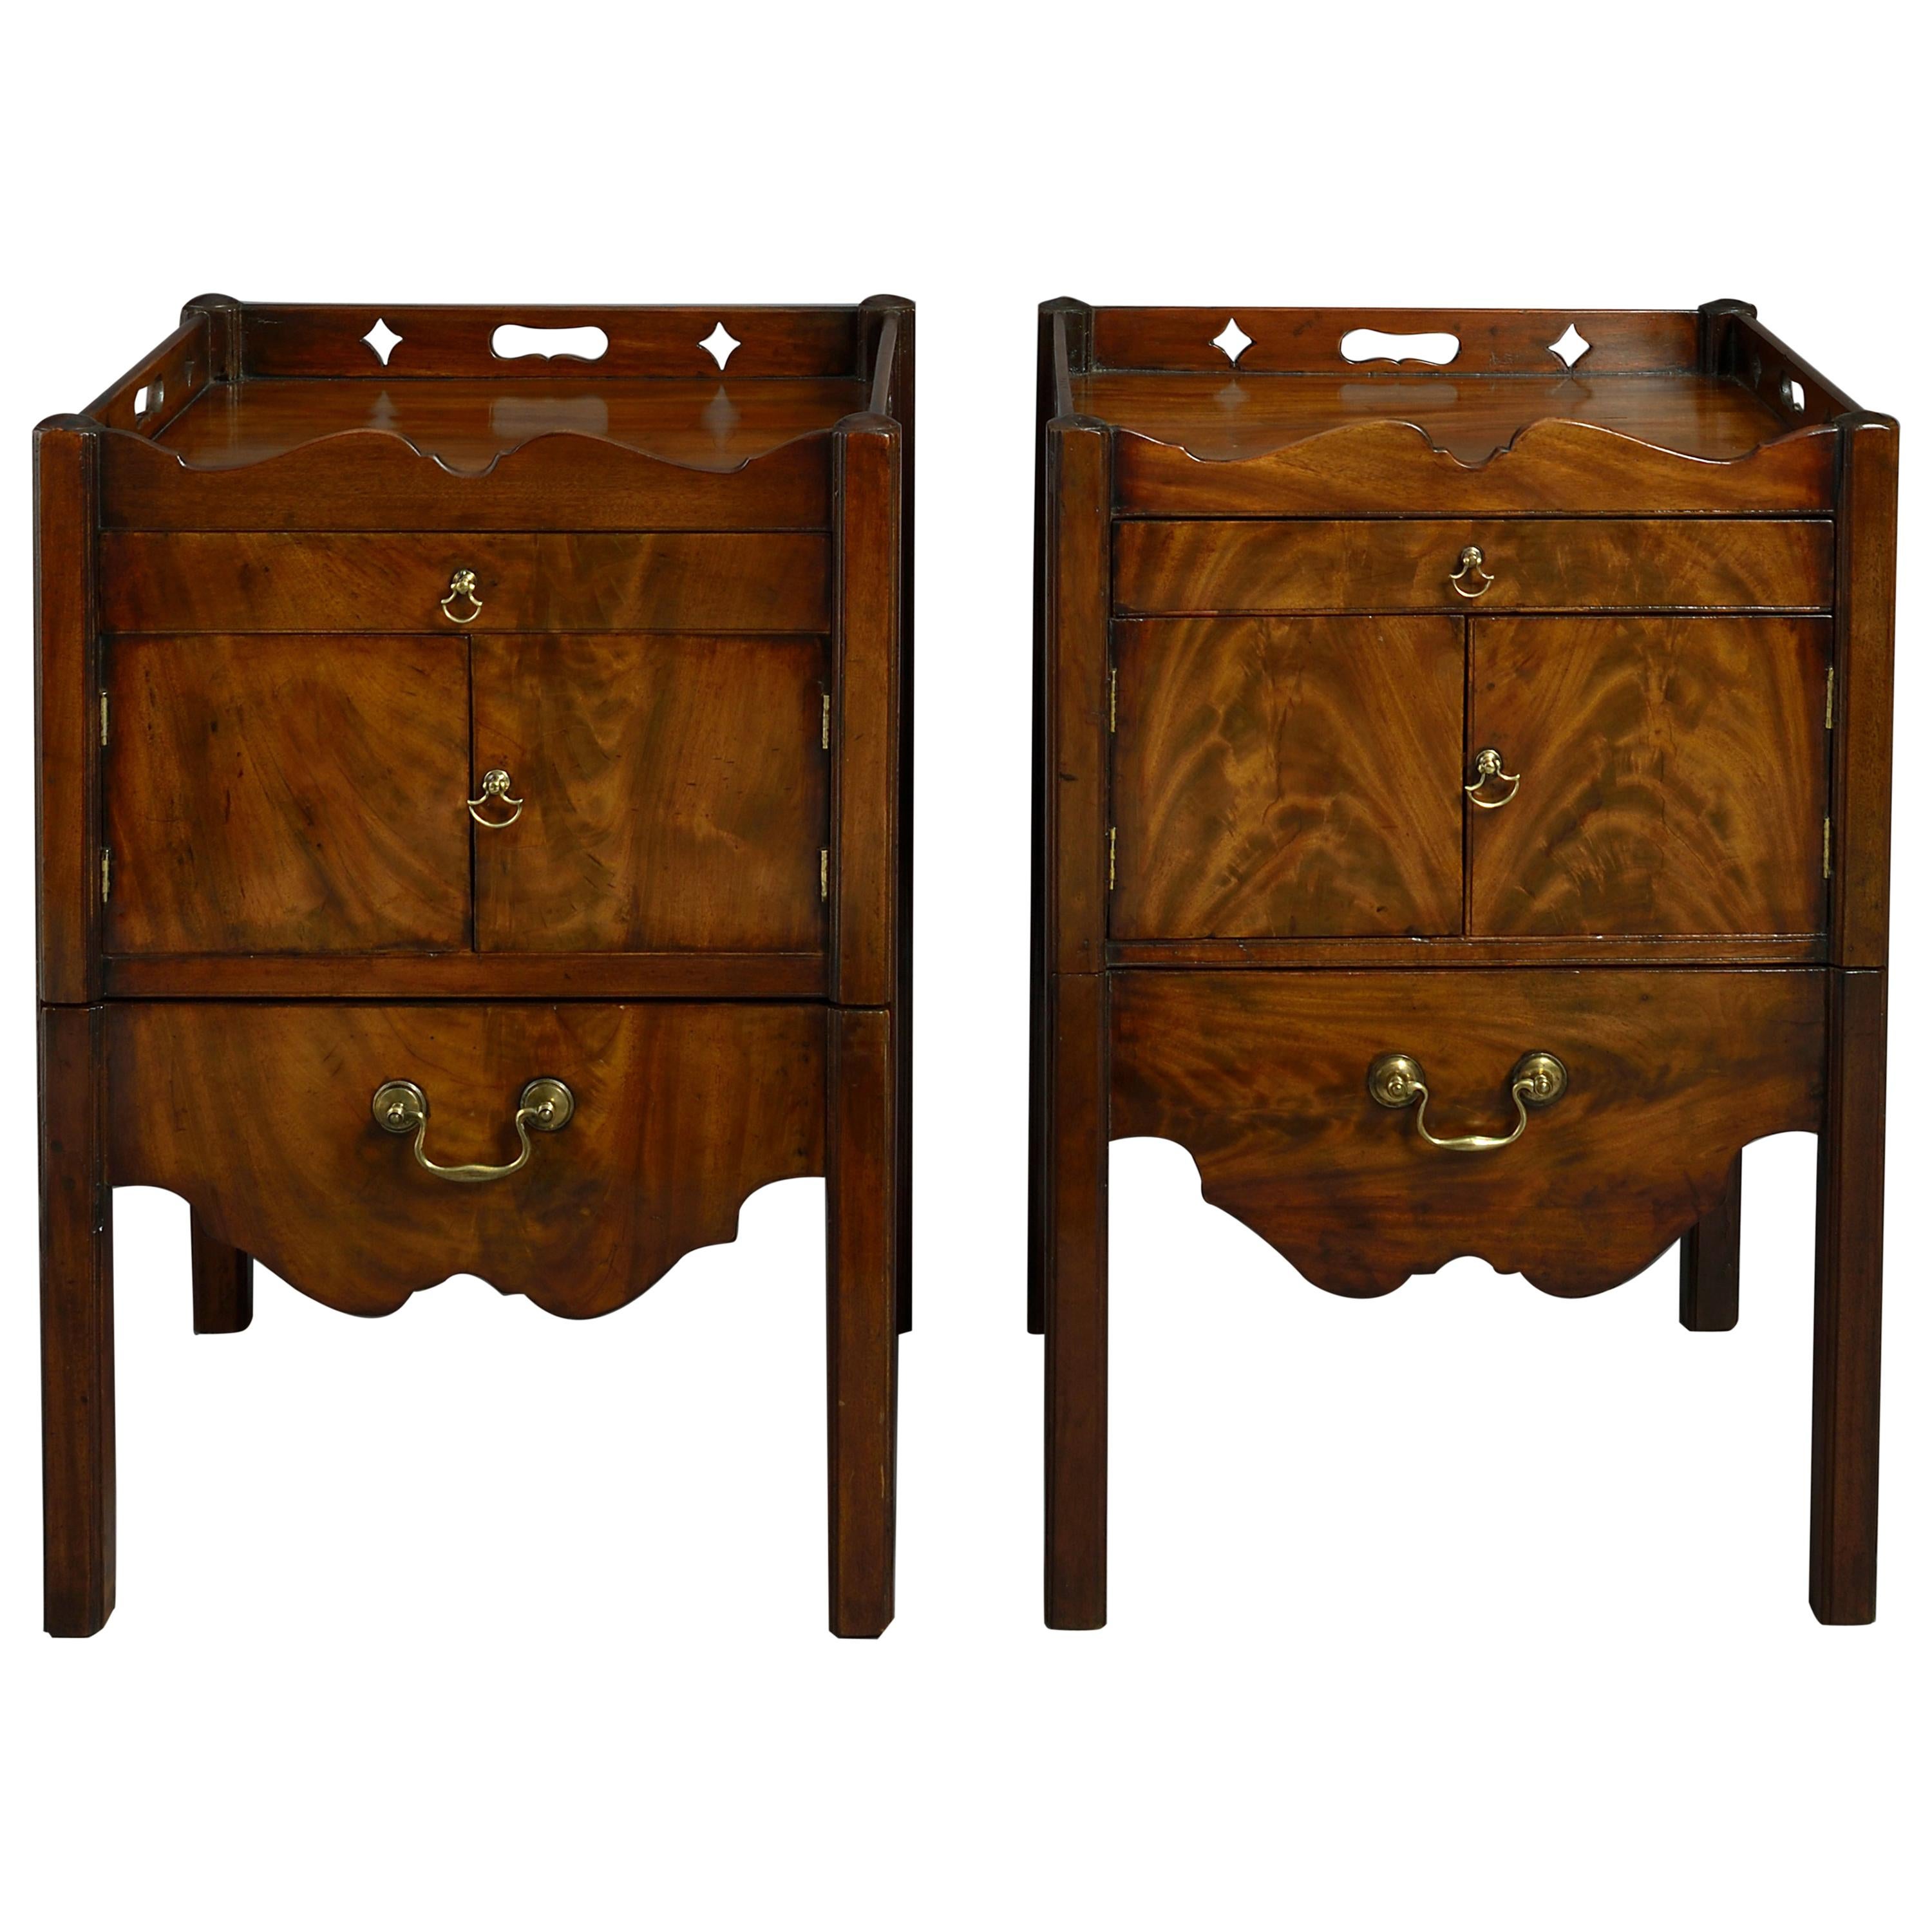 Pair of 18th Century George III Period Mahogany Bedside Cabinets